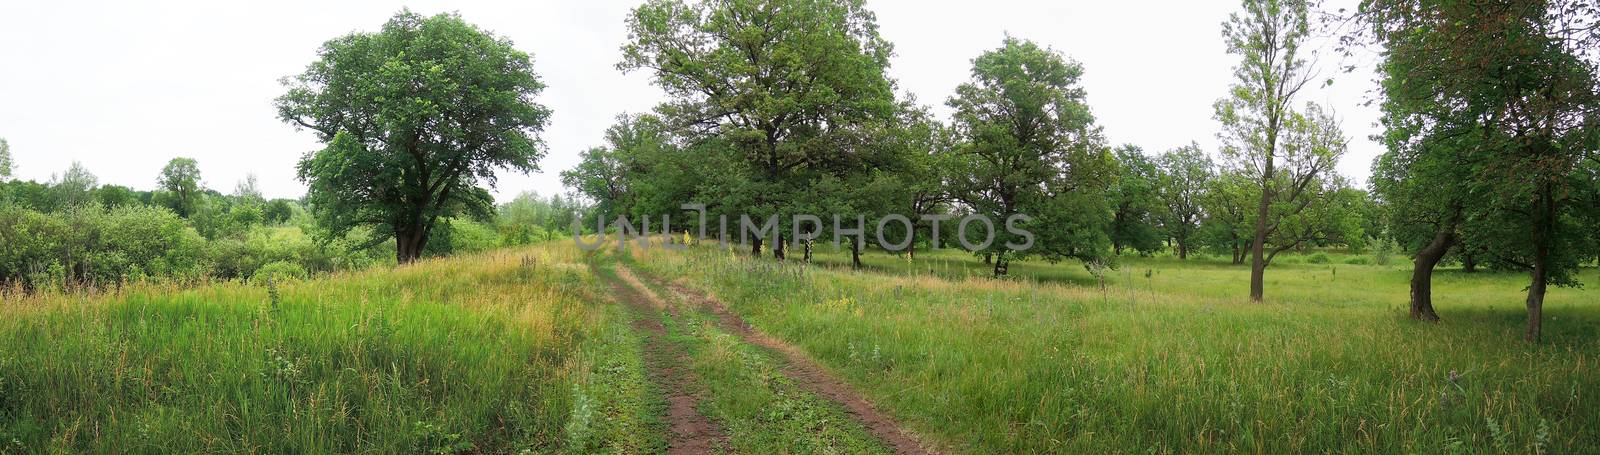 road leading through a meadow in the woods 